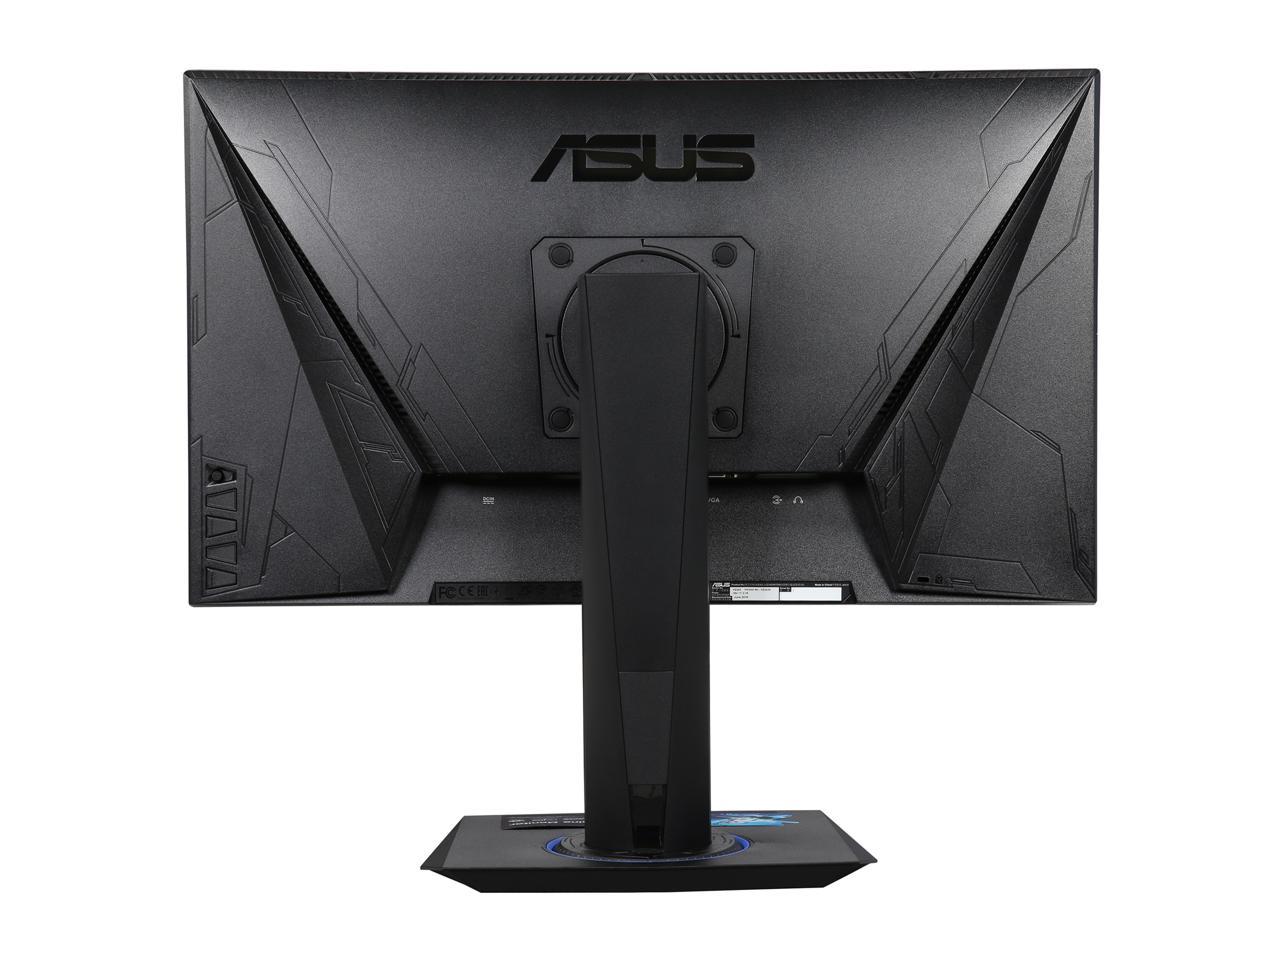 ASUS VG245H Black 24" 1ms (GTG) Widescreen 2x HDMI Asus Eye Care with Ultra Low-Blue Light & Flicker-Free Console Gaming Monitor AMD FreeSync Built-in Speakers VESA Mountable Height & Pivot Adjustment